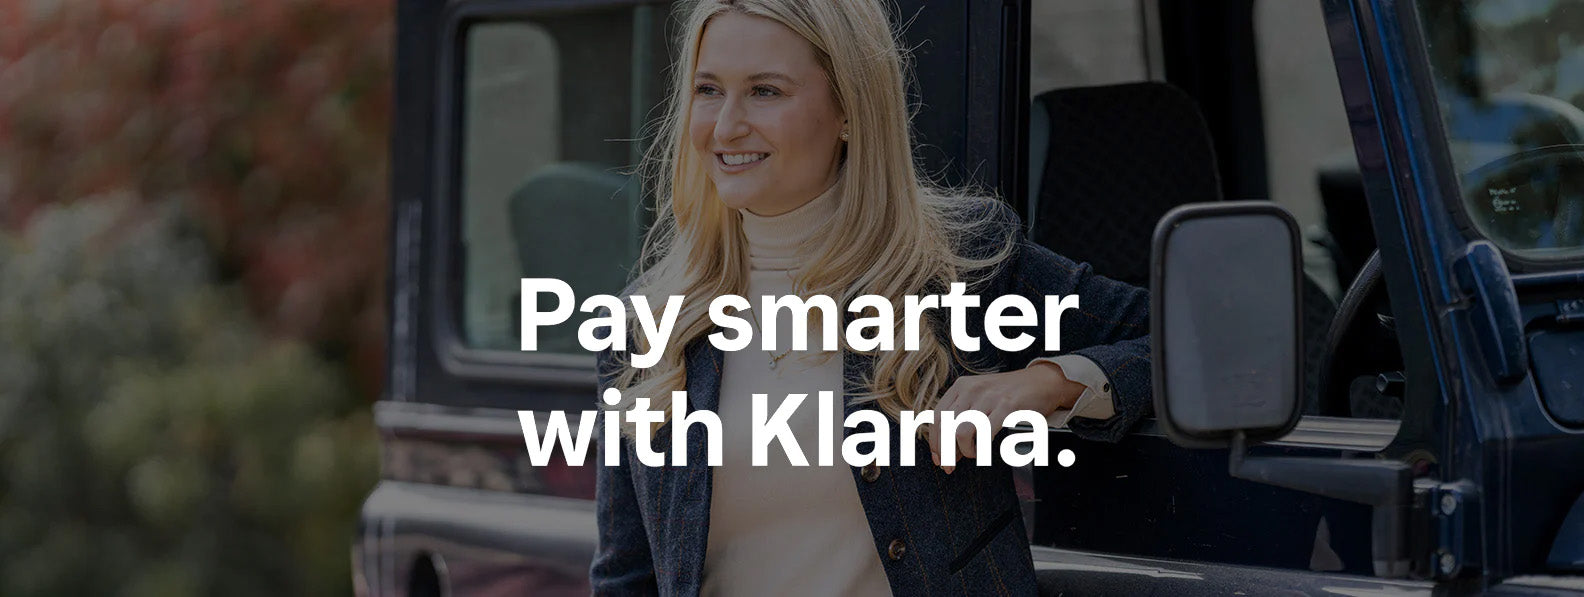 New Forest partner with Klarna to provide even more flexible payments!